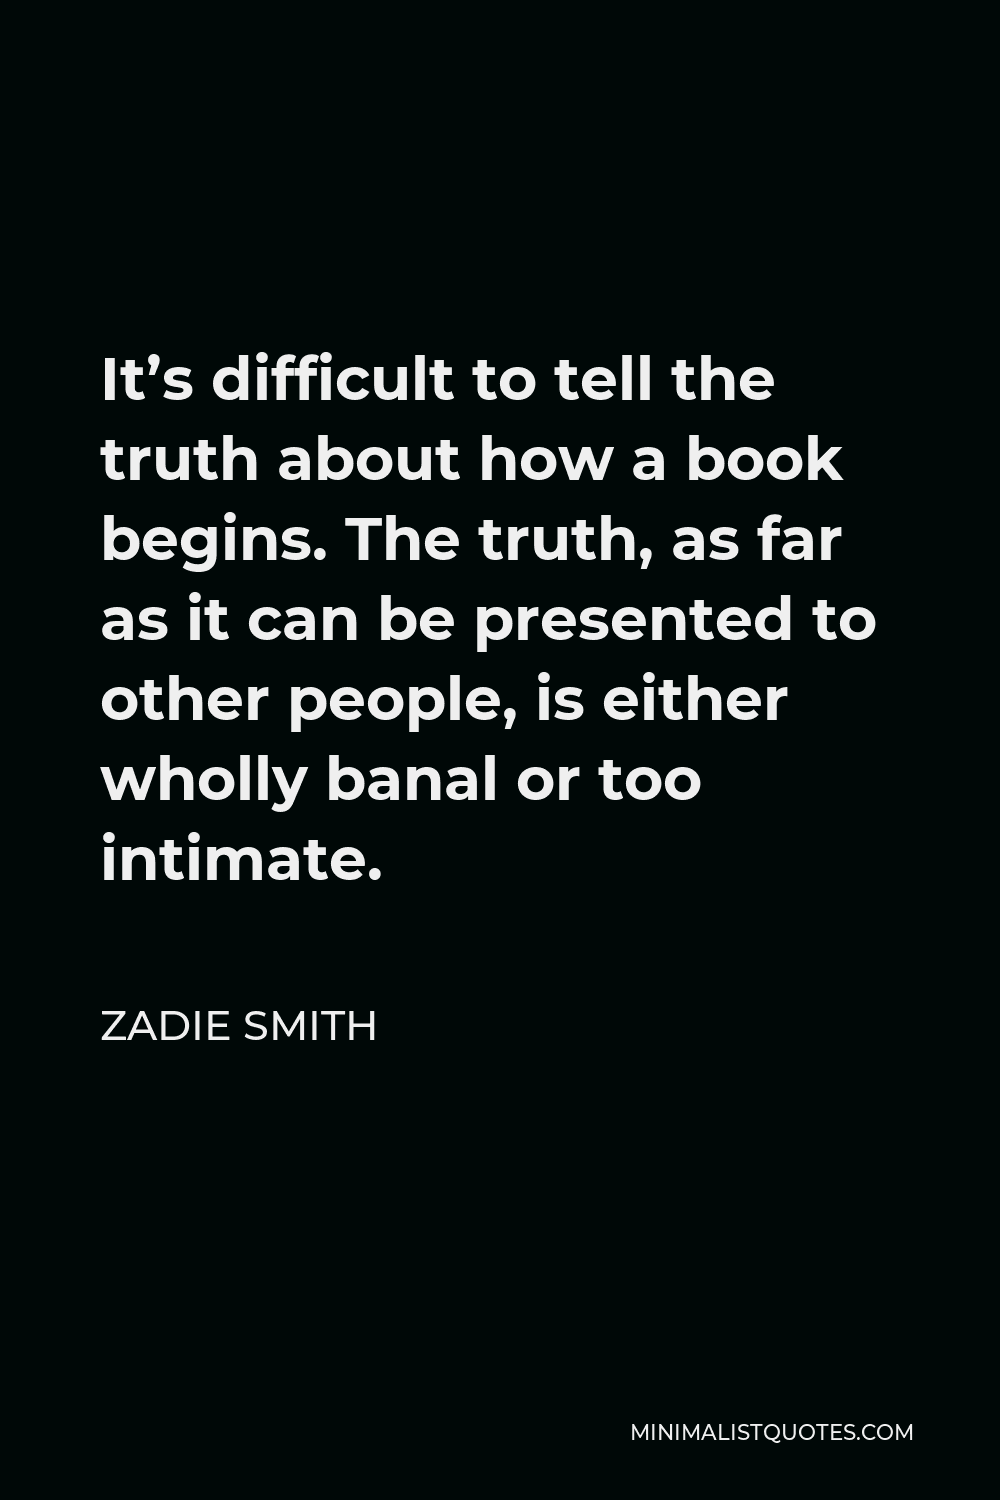 Zadie Smith Quote - It’s difficult to tell the truth about how a book begins. The truth, as far as it can be presented to other people, is either wholly banal or too intimate.